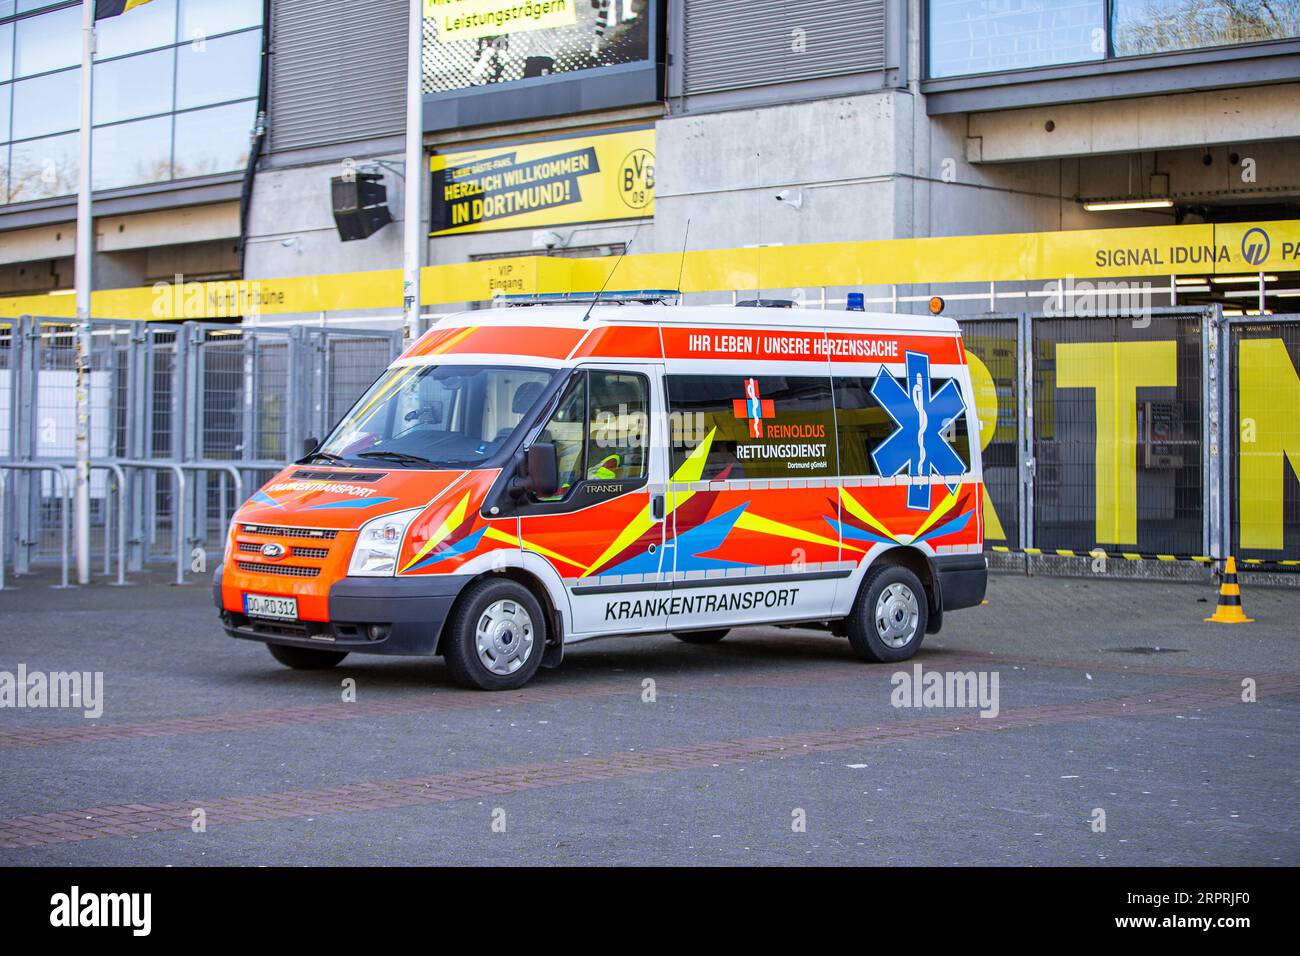 200405 -- DORTMUND, April 5, 2020 Xinhua -- An ambulance is seen outside the COVID-19 testing center at Borussia Dortmund s stadium in Dortmund, Germany, April 4, 2020. Borussia Dortmund s stadium housed a COVID-19 testing center From Saturday. Rooms in the Westfalenstadion s north stand have been prepared to take in people suspected of suffering from COVID-19. It is hoped the center will relieve pressure on the medical facilities in the city of Dortmund. Photo by Joachim Bywaletz/Xinhua SPGERMANY-DORTMUND-STADIUM-COVID-19-TESTING CENTER PUBLICATIONxNOTxINxCHN Stock Photo